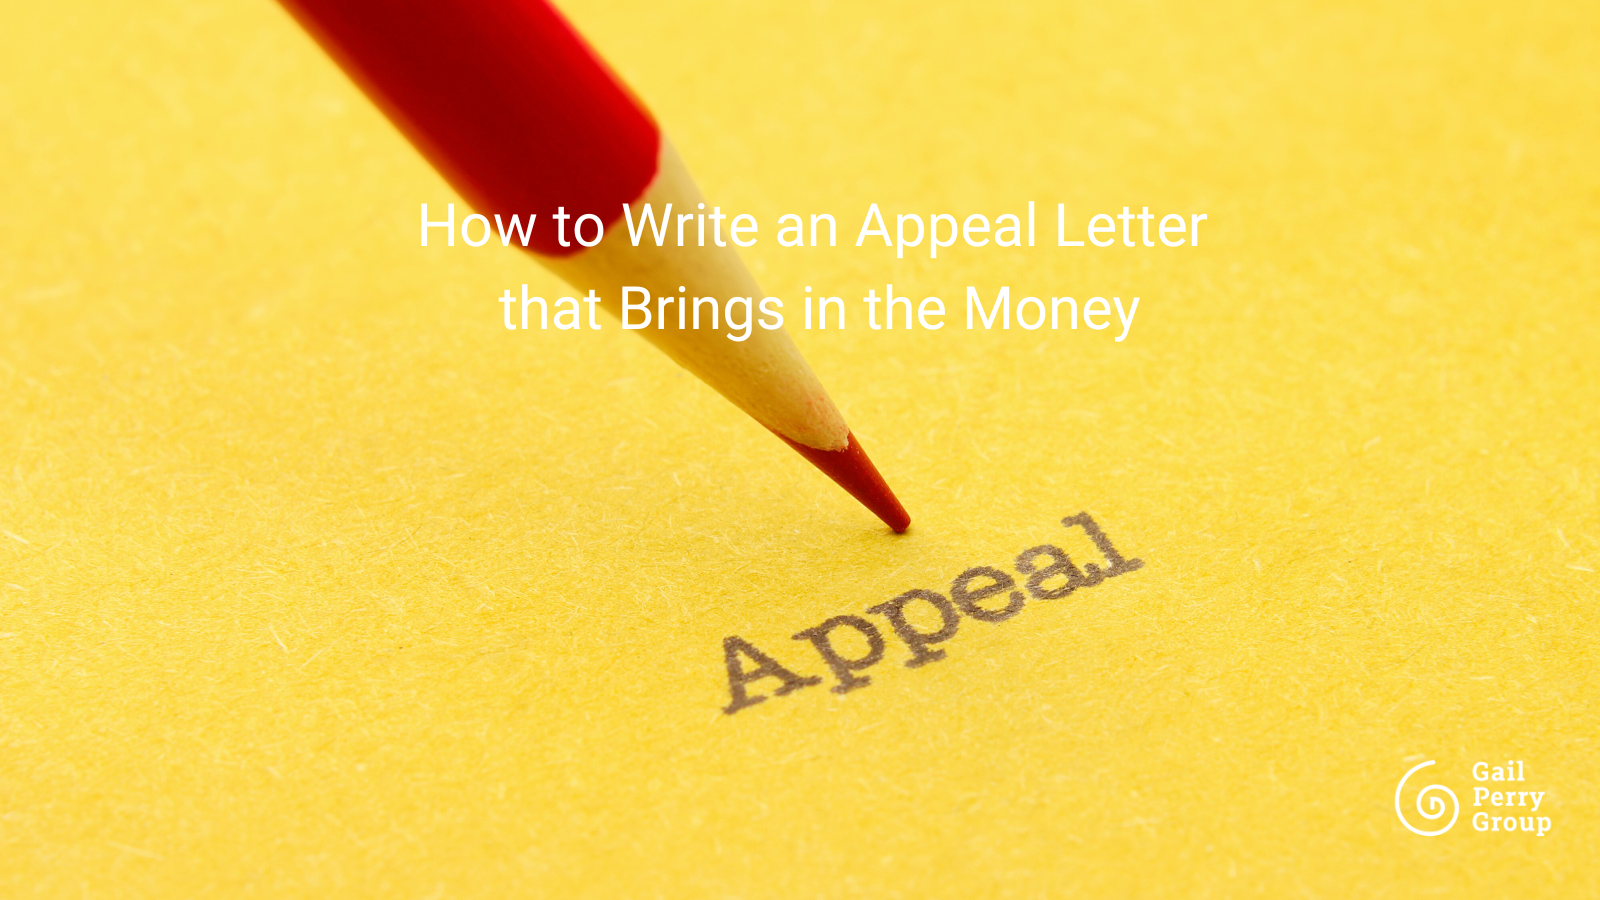 How to Write a Fundraising Appeal Letter That Brings in the Money